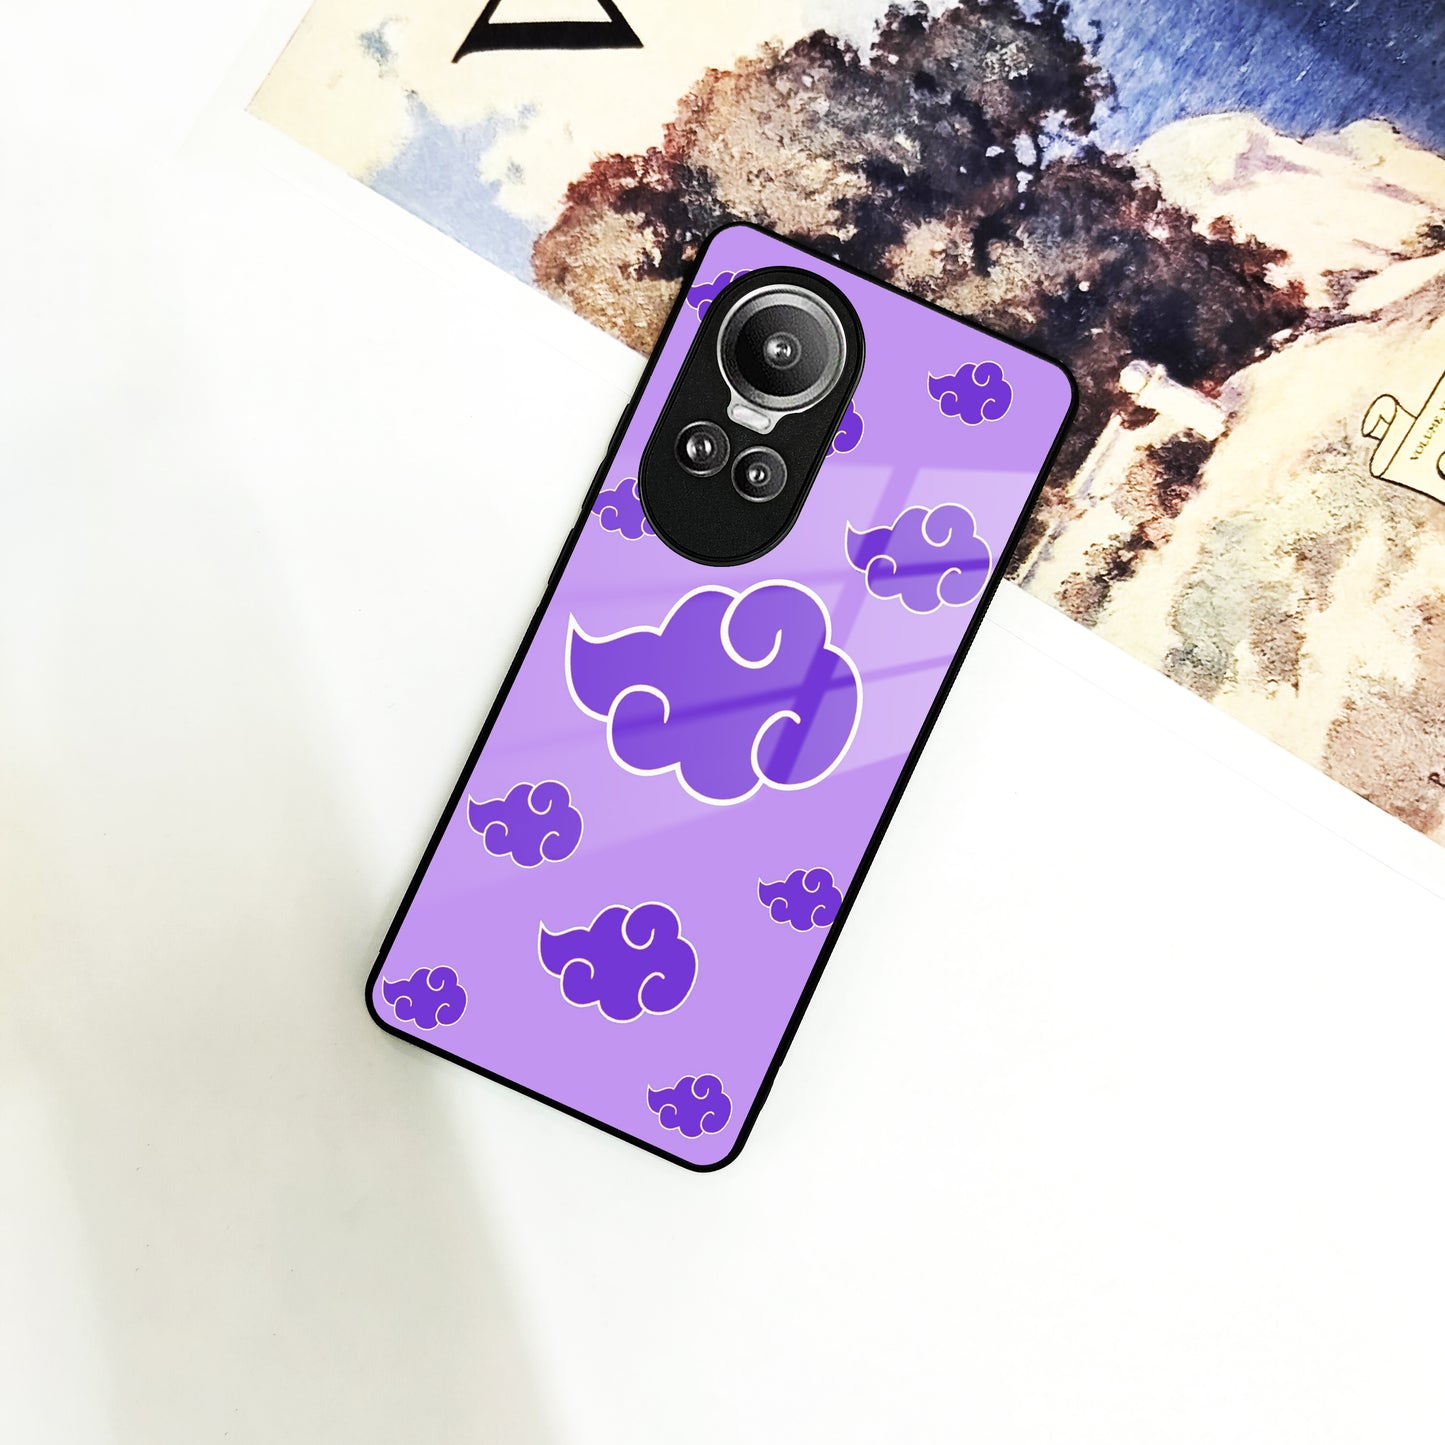 Purple Cloud Mobile Glass Phone Case Cover For Oppo